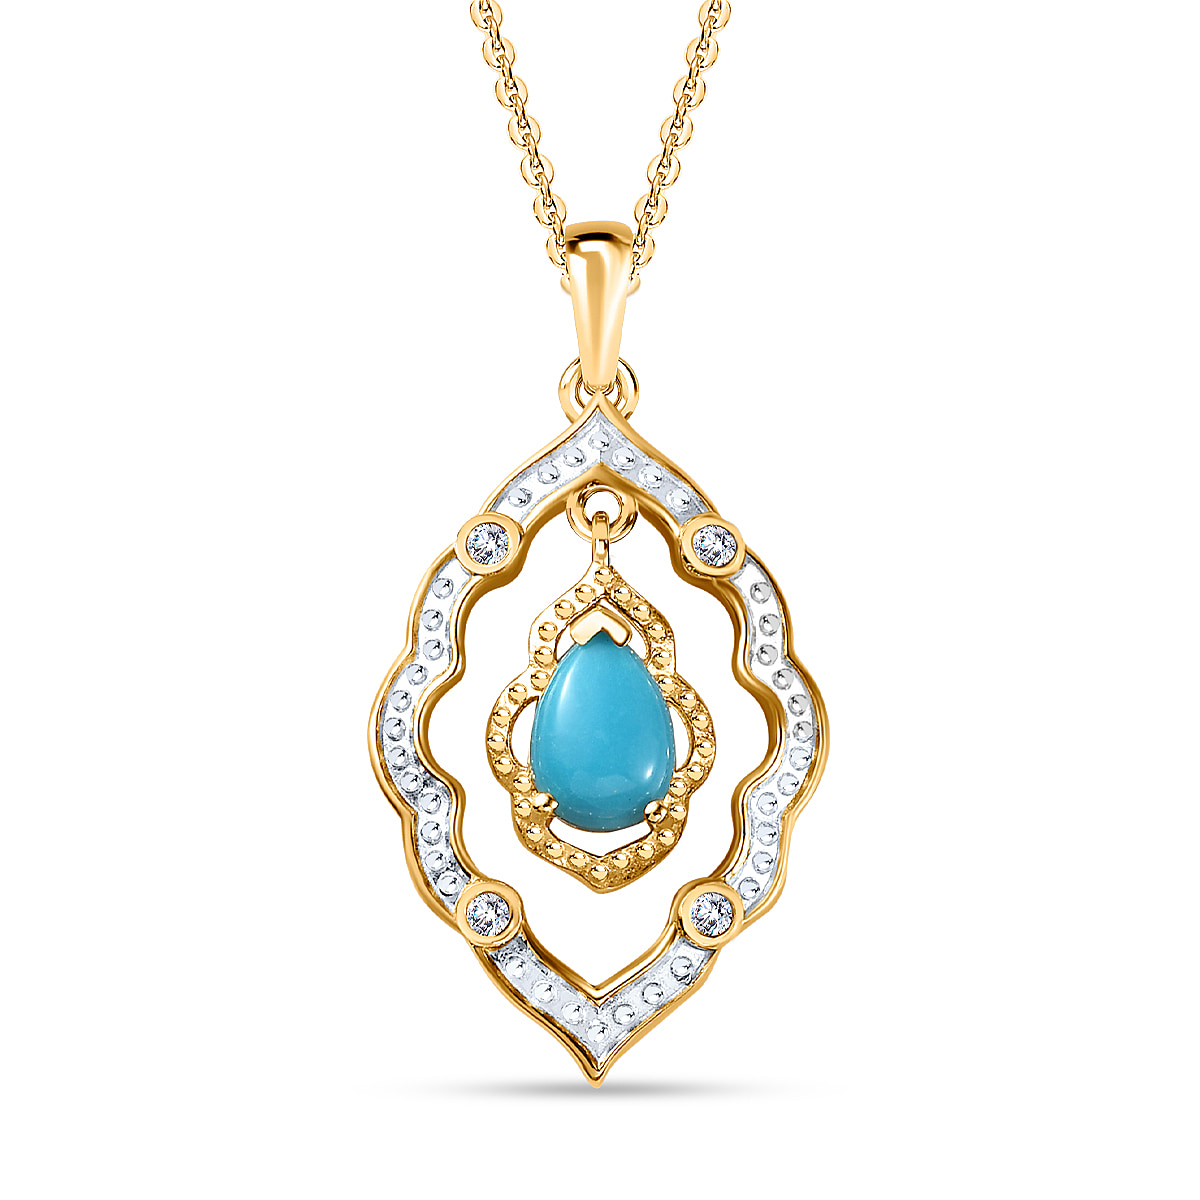 Arizona Sleeping Beauty Turquoise and Natural Zircon Pendant with Chain (Size 20) in 18K Gold Vermeil Plated Sterling Silver